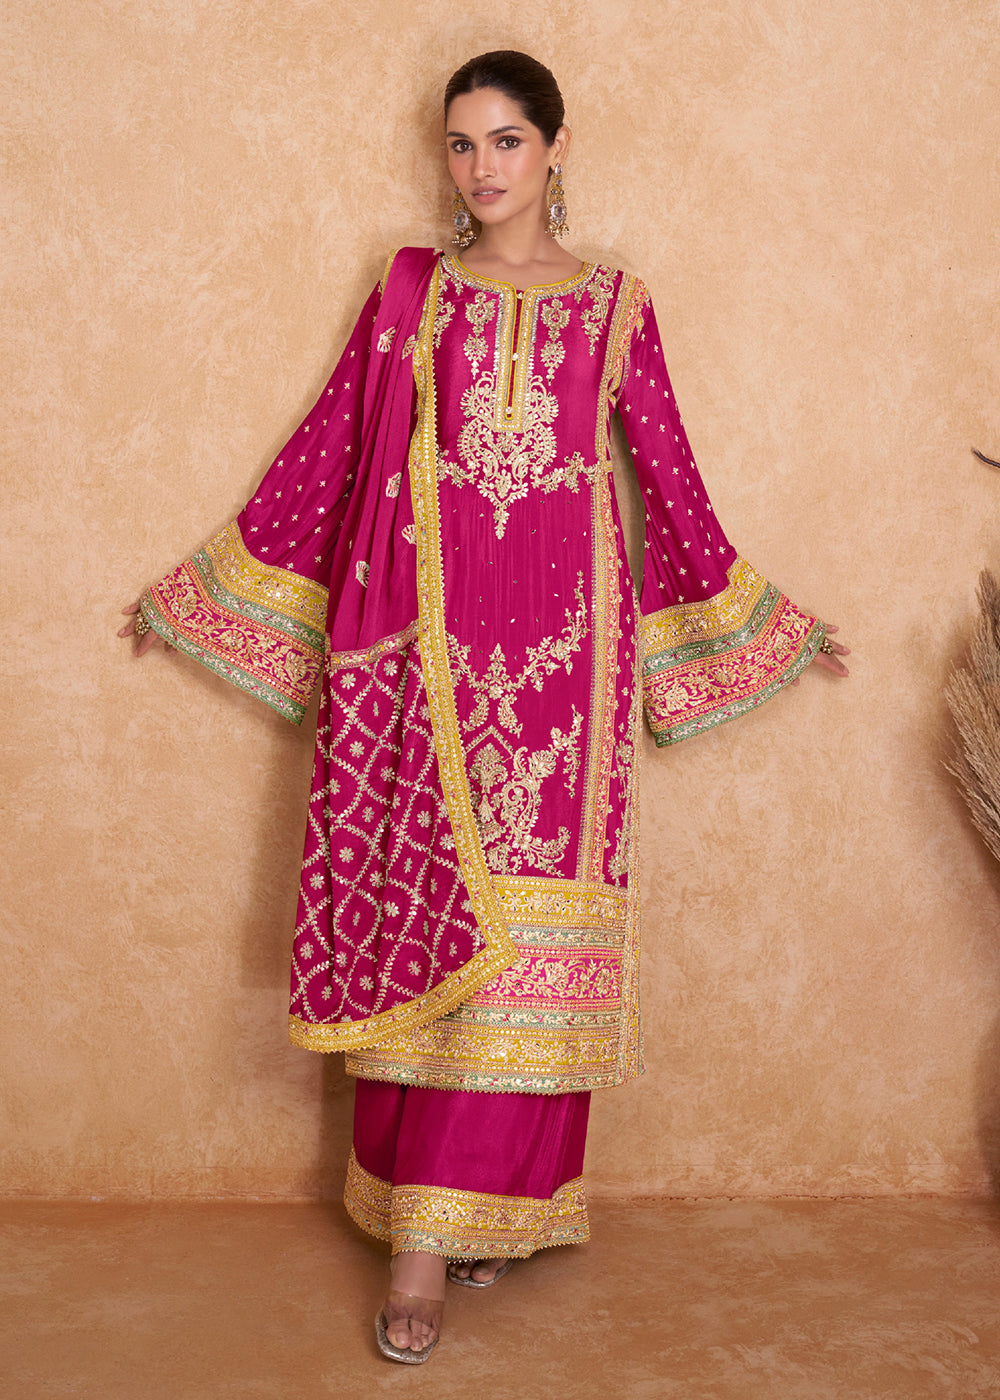 Buy Now Fancy Hot Pink Chinnon Embroidered Designer Palazzo Suit Online in USA, UK, Canada, Germany, Australia & Worldwide at Empress Clothing.